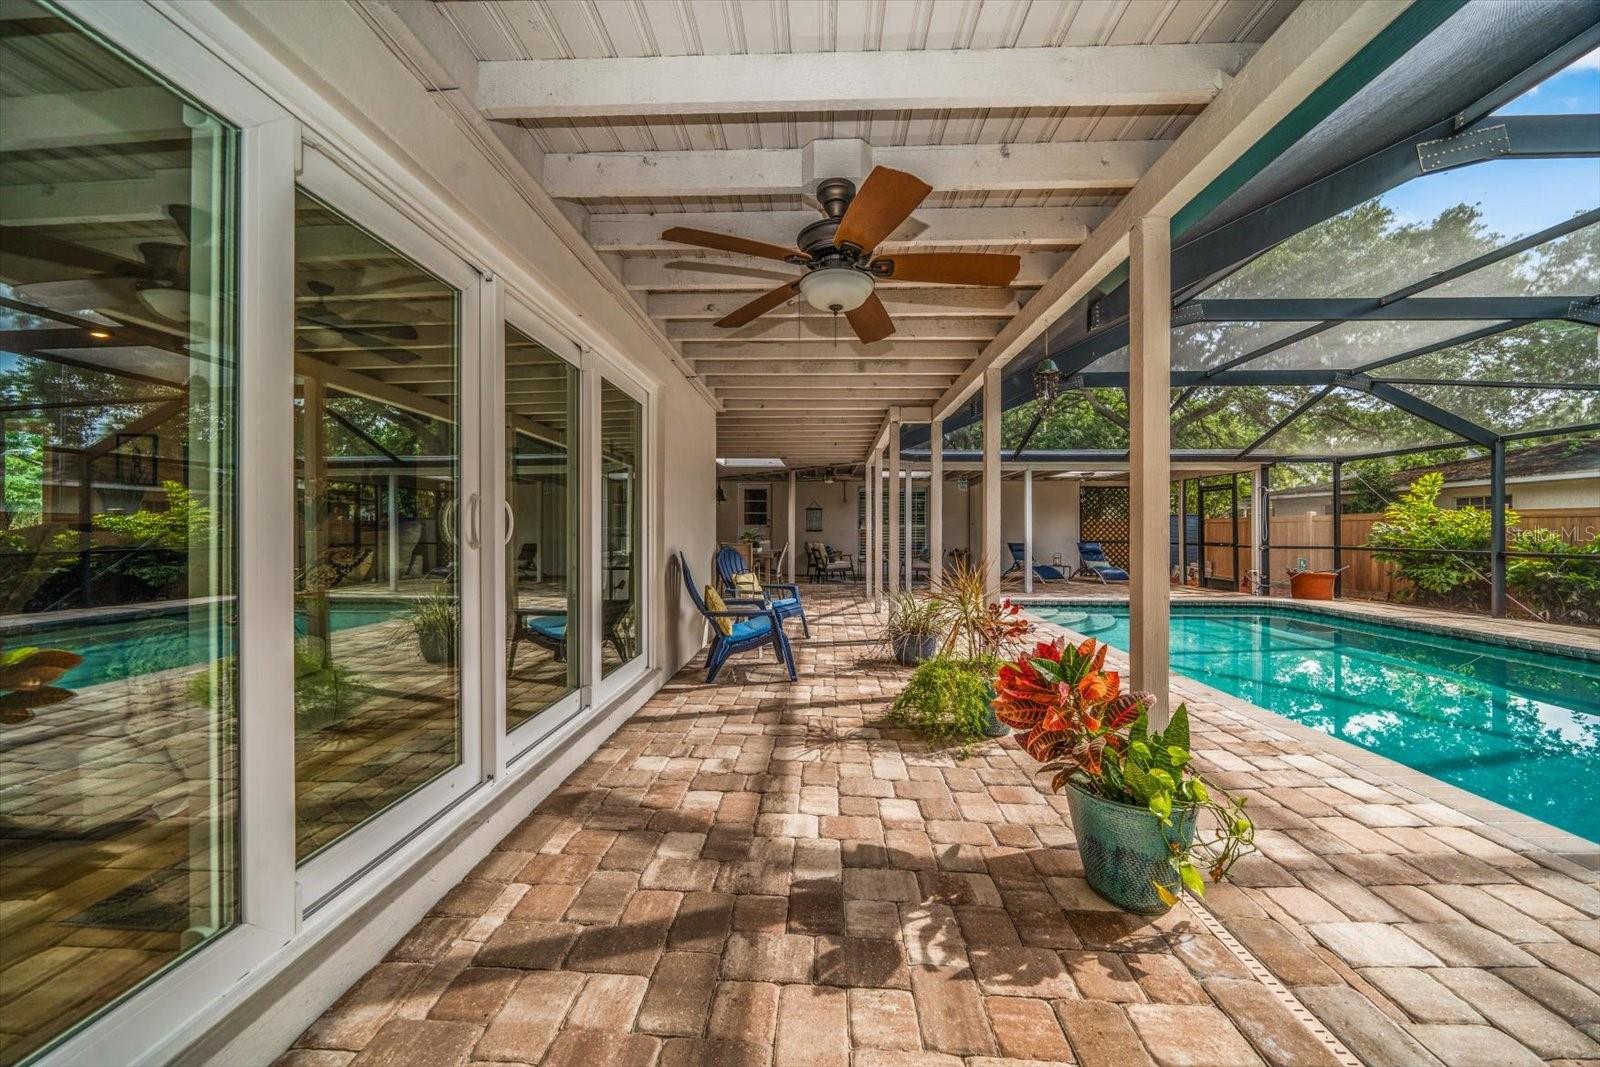 Spacious poolside area for entertaining or relaxing!